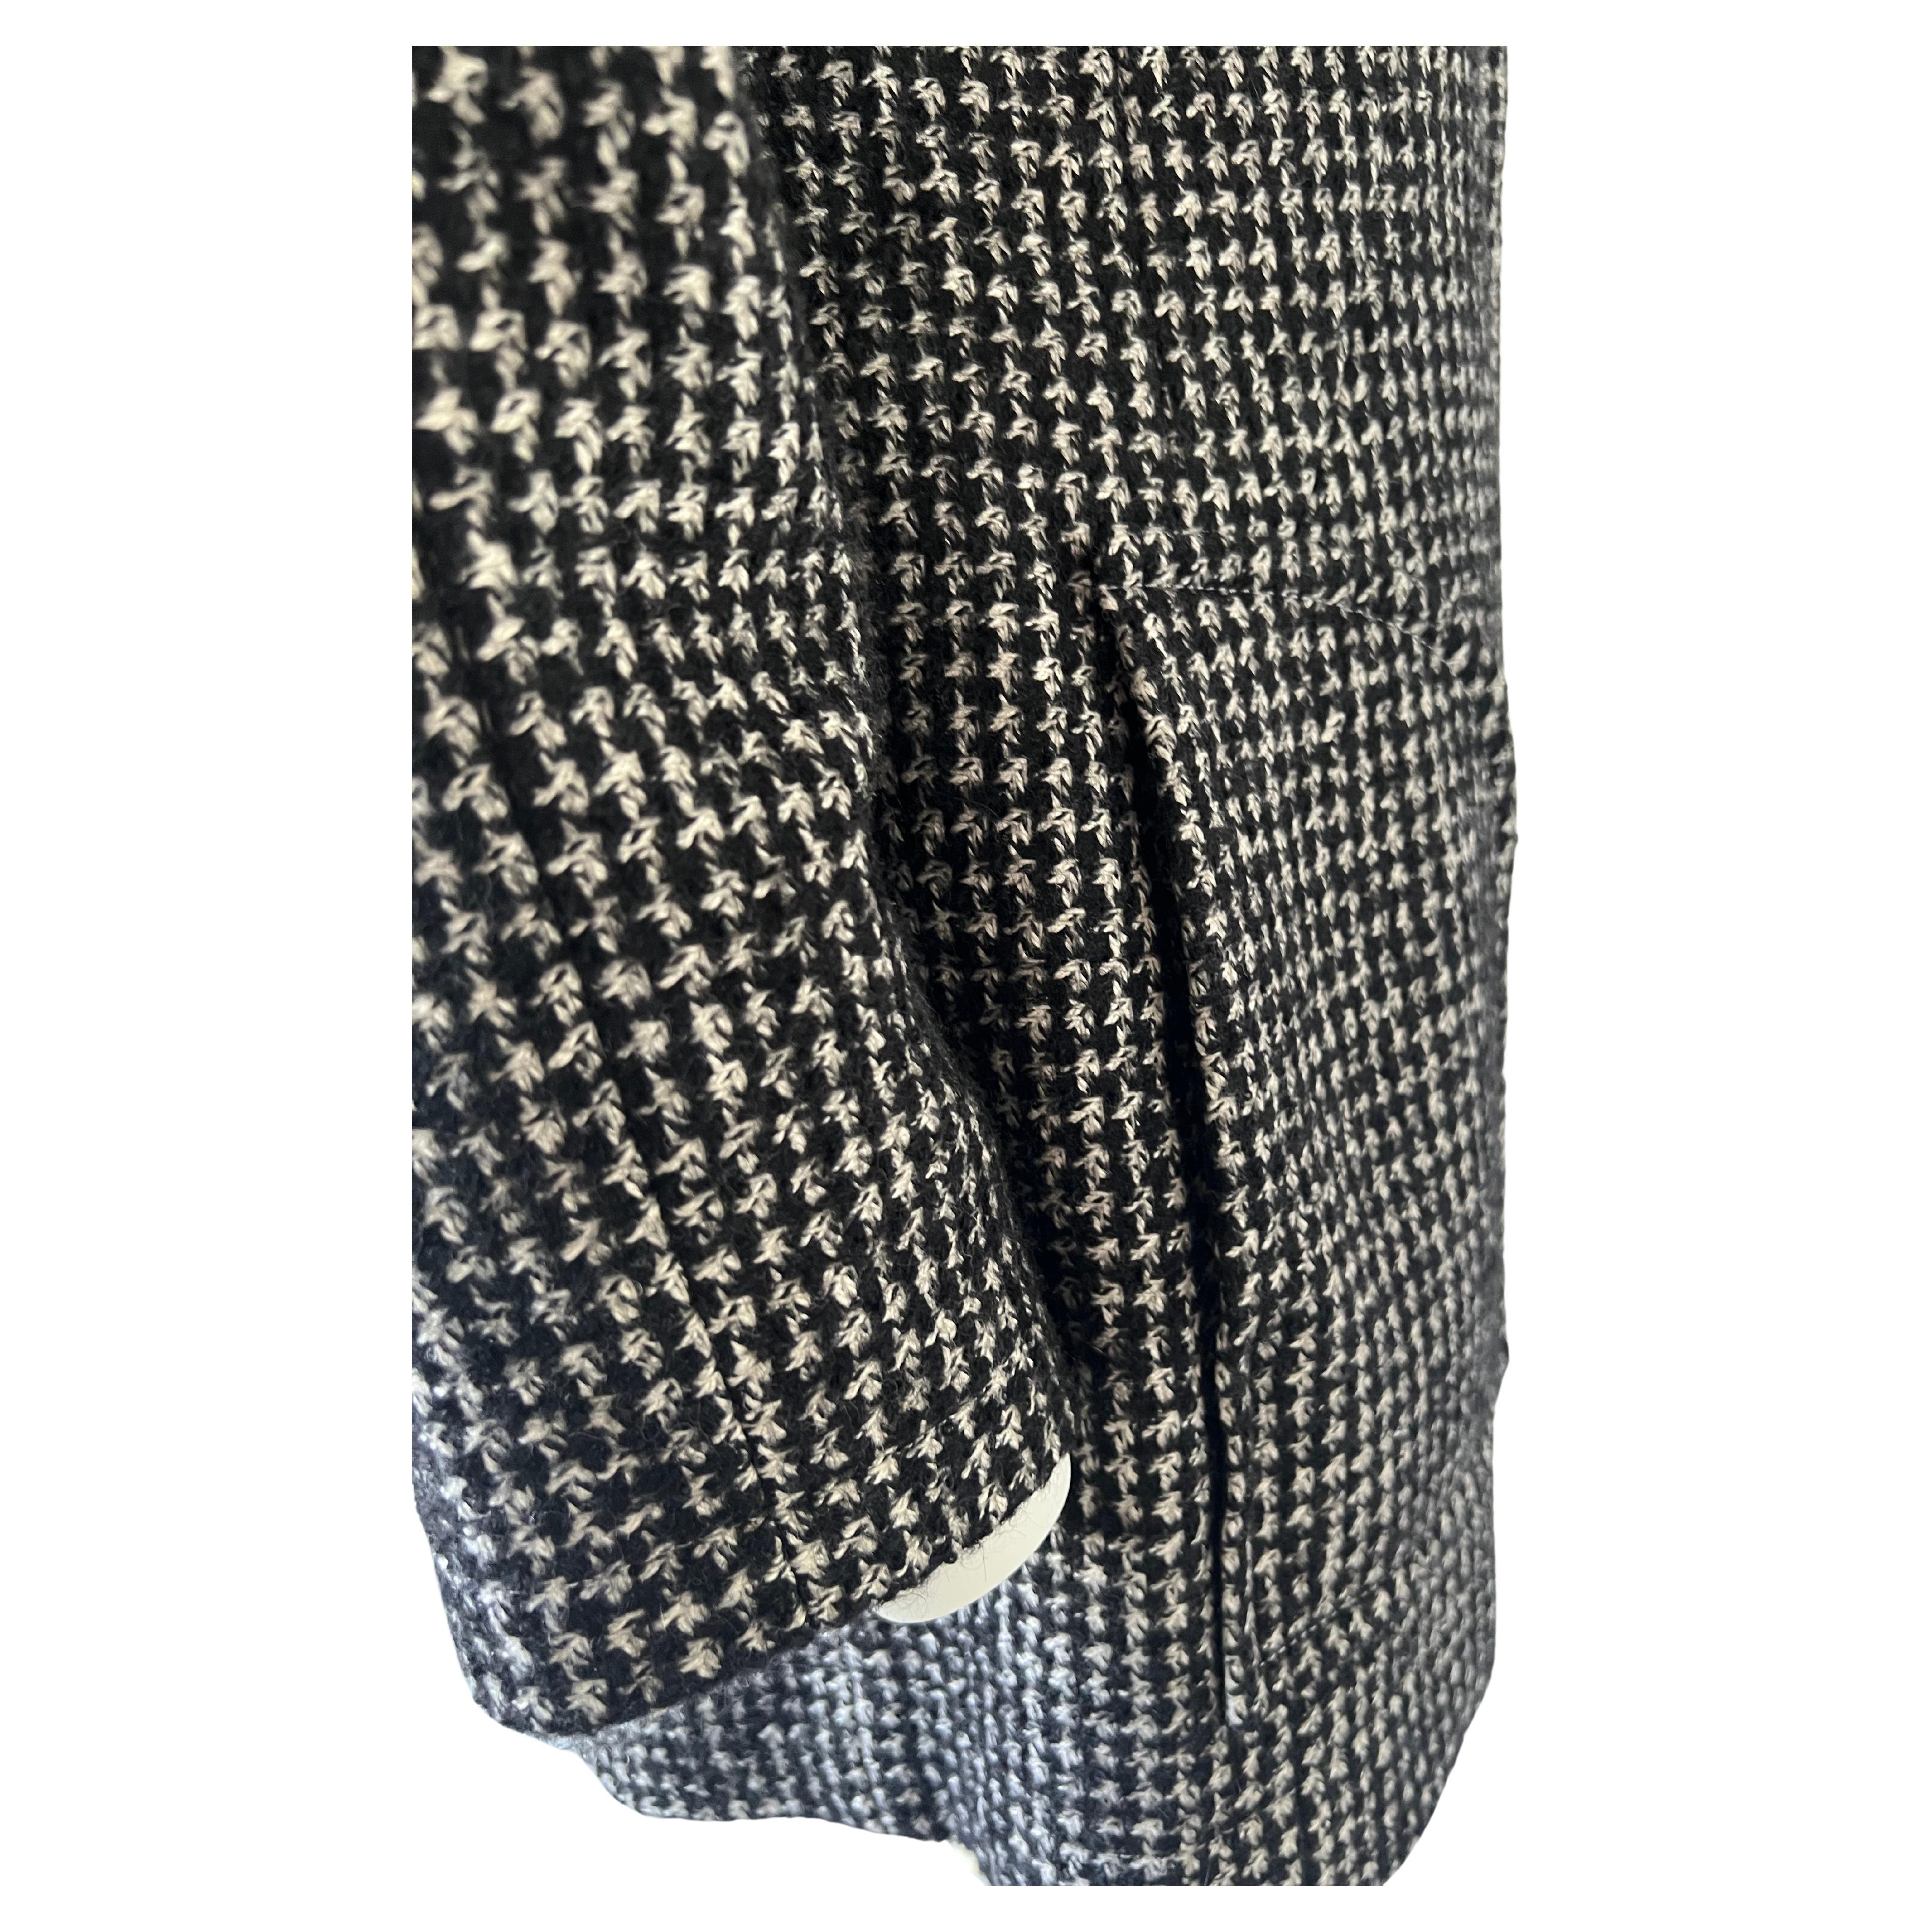 Black and white tweed Chanel Jacket 2014 For Sale 4